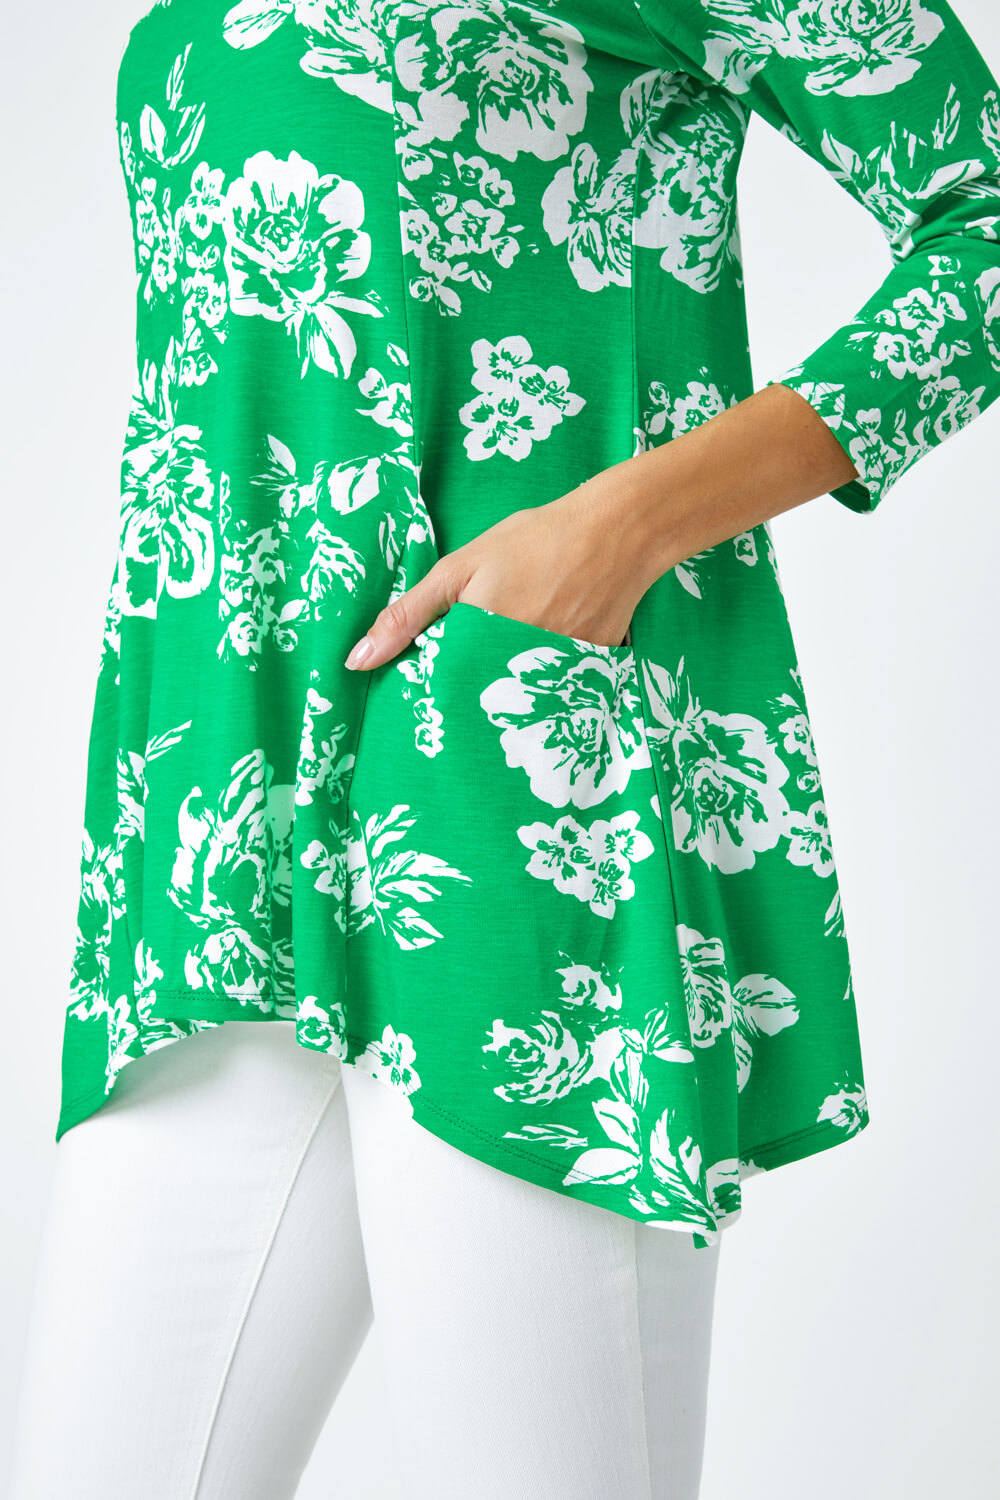 Green Floral Print Swing Stretch Top, Image 5 of 5